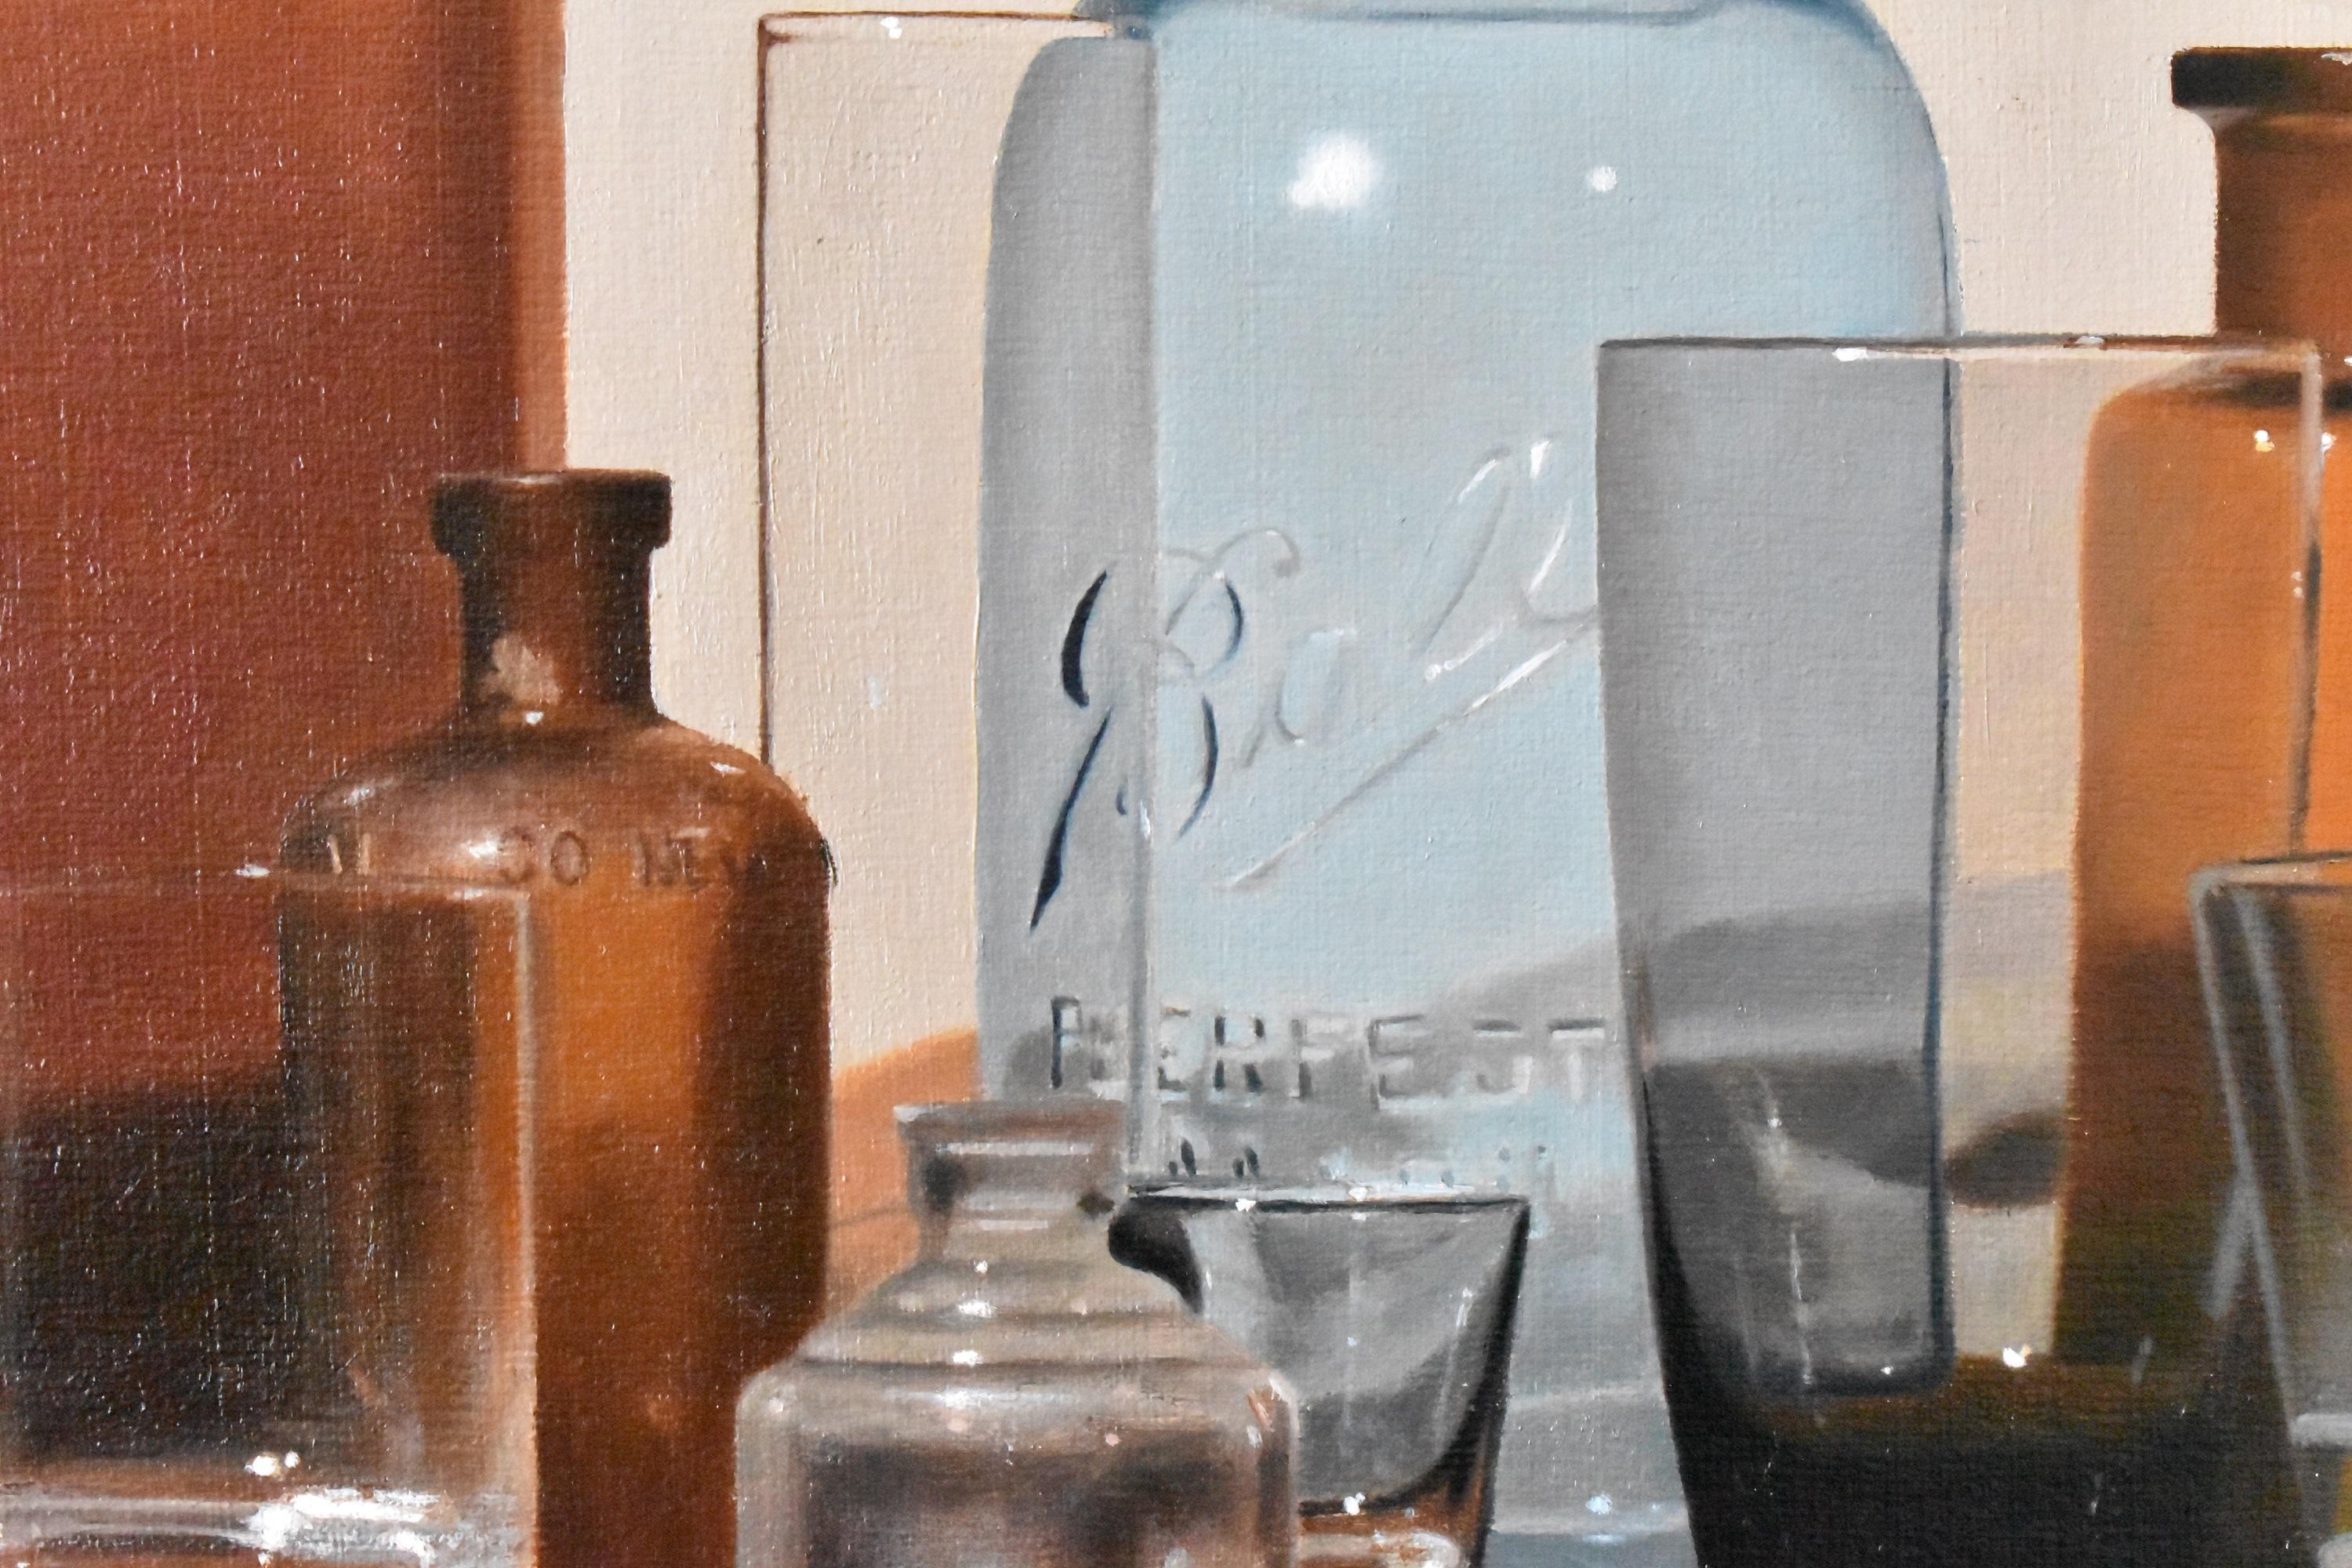 <p>Artist Comments<br>A realistic painting of an assortment of glassware set atop a wooden desk by artist Christopher Garvey. A fitting muted background completes the scene heightening the colors of the subjects. Translucent brown, blue, and clear